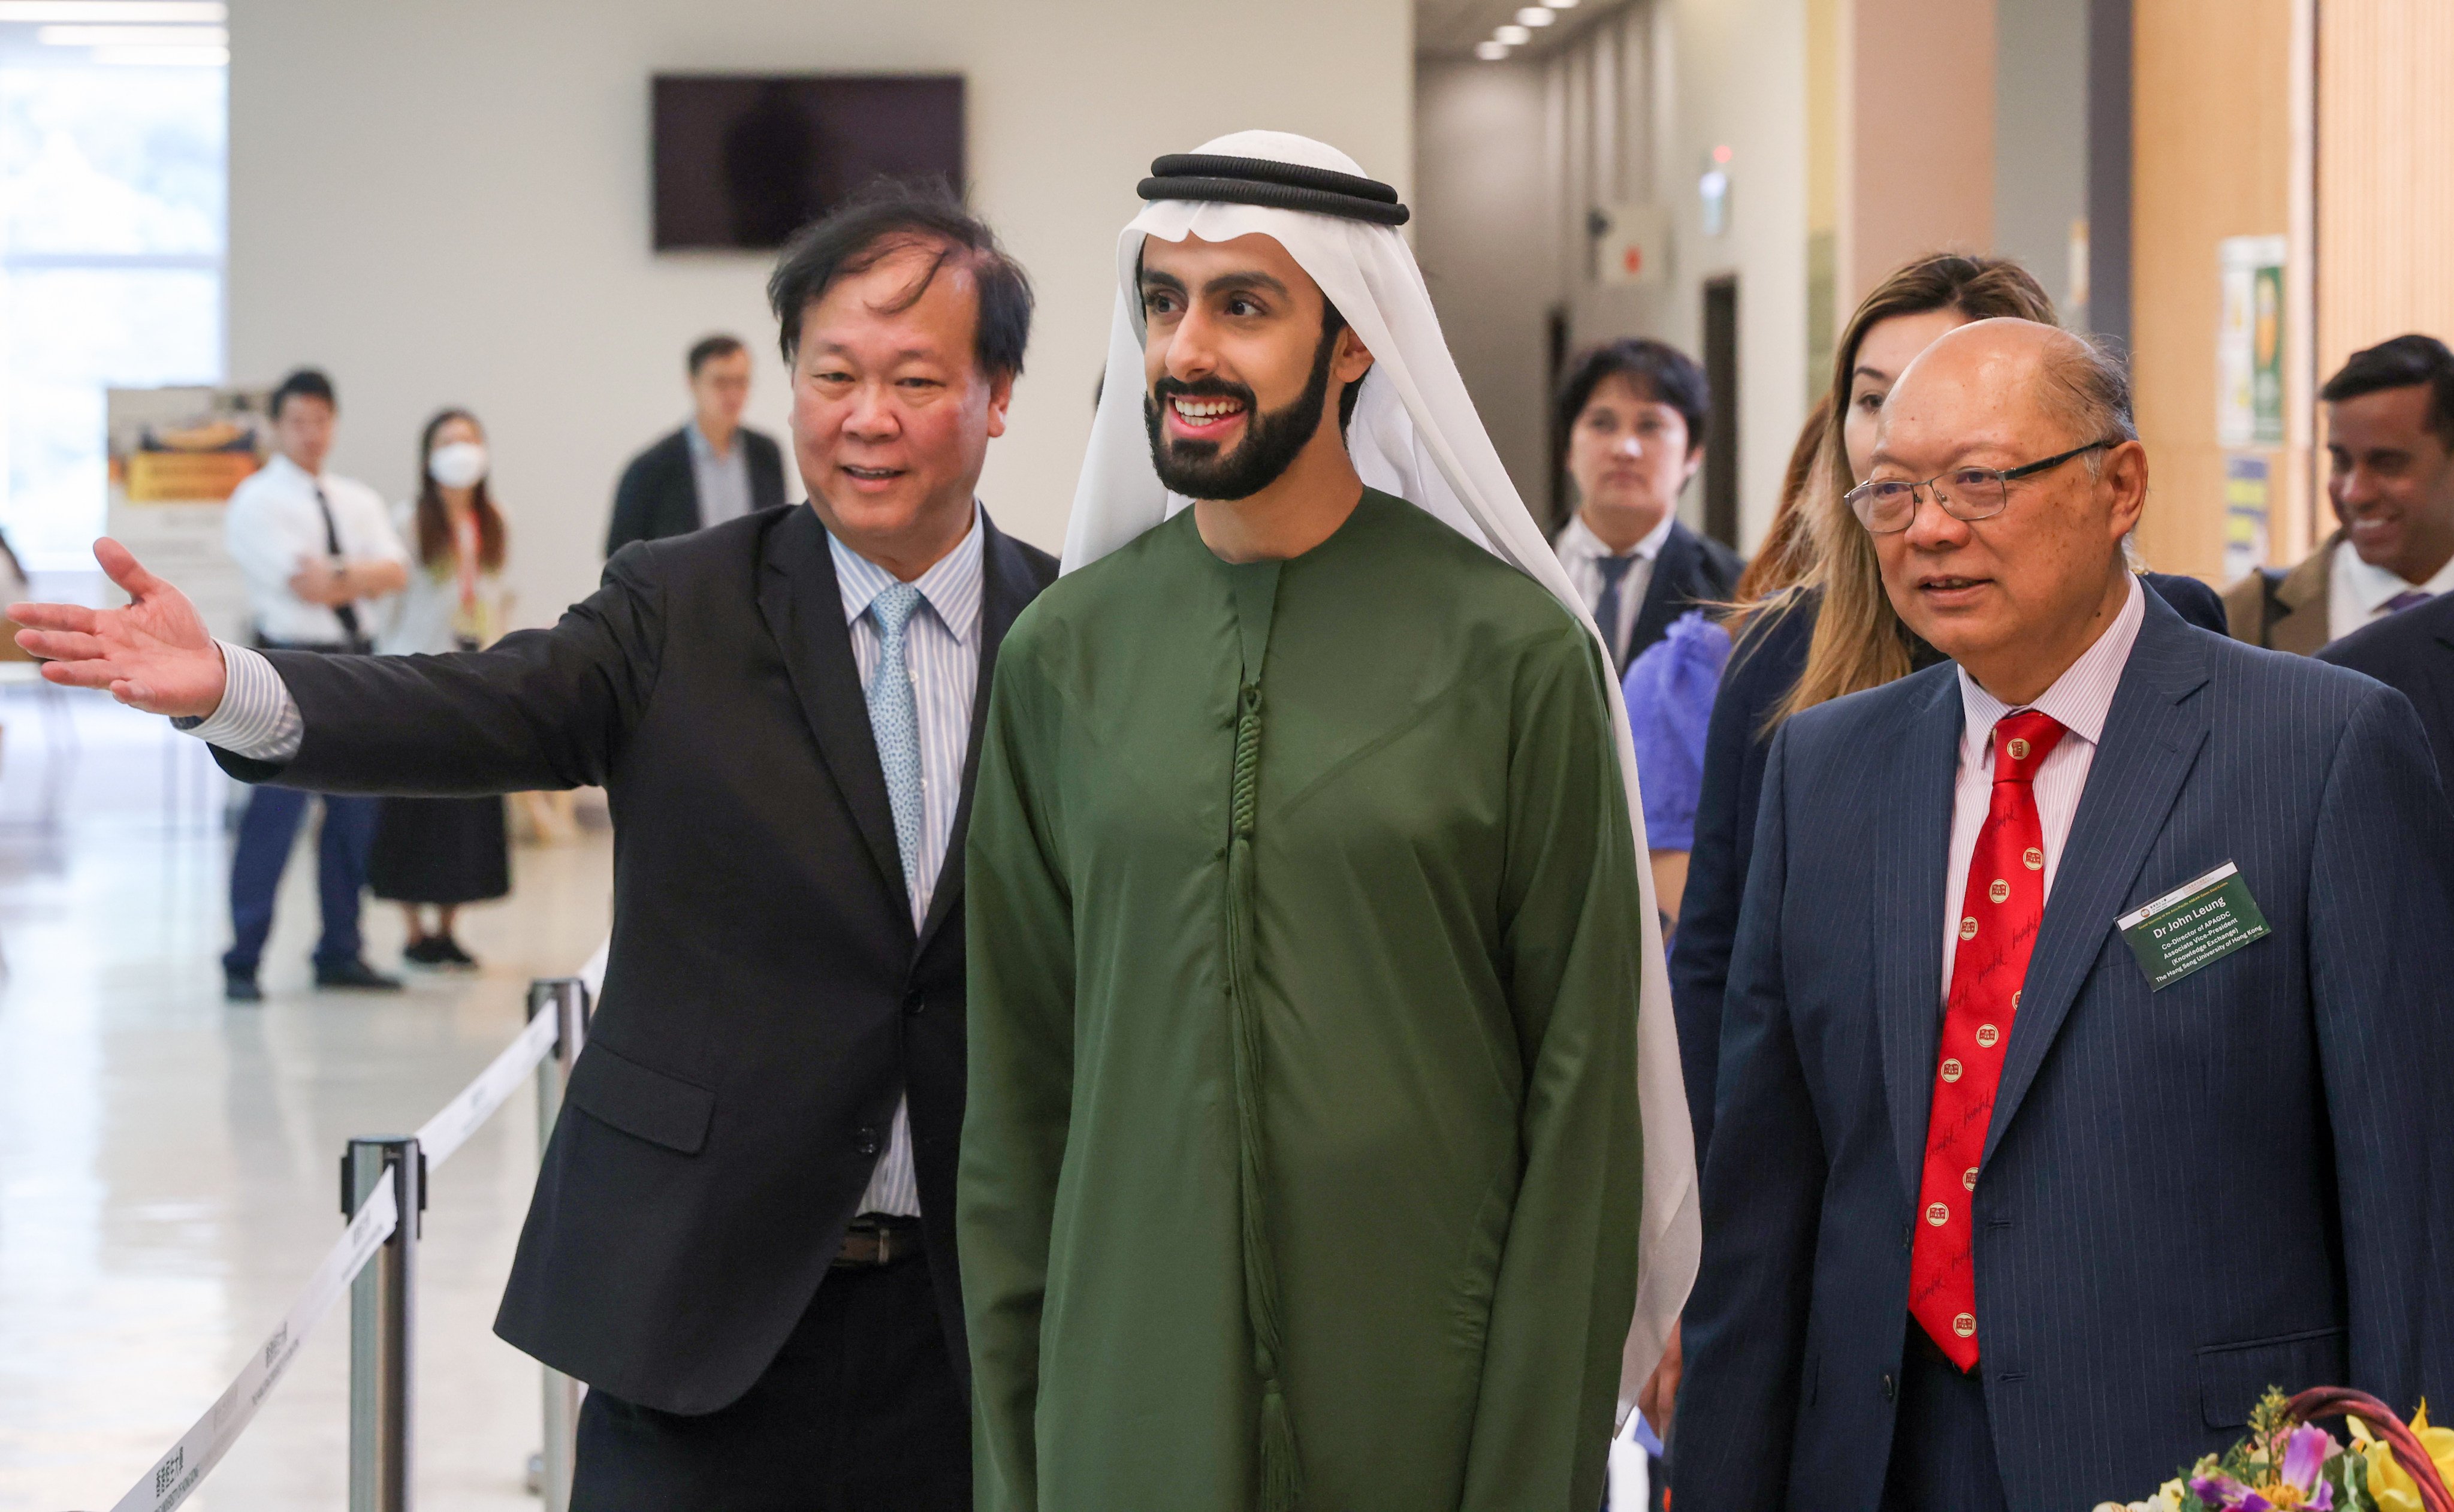 Sheikh Ali Al Maktoum (centre) and Dr John Leung (right), director of ICAPE and associate vice-president (knowledge exchange) at Hang Seng University. The prince from the UAE made waves after pledging millions for a family office in Hong Kong. Photo: Yik Yeung-man